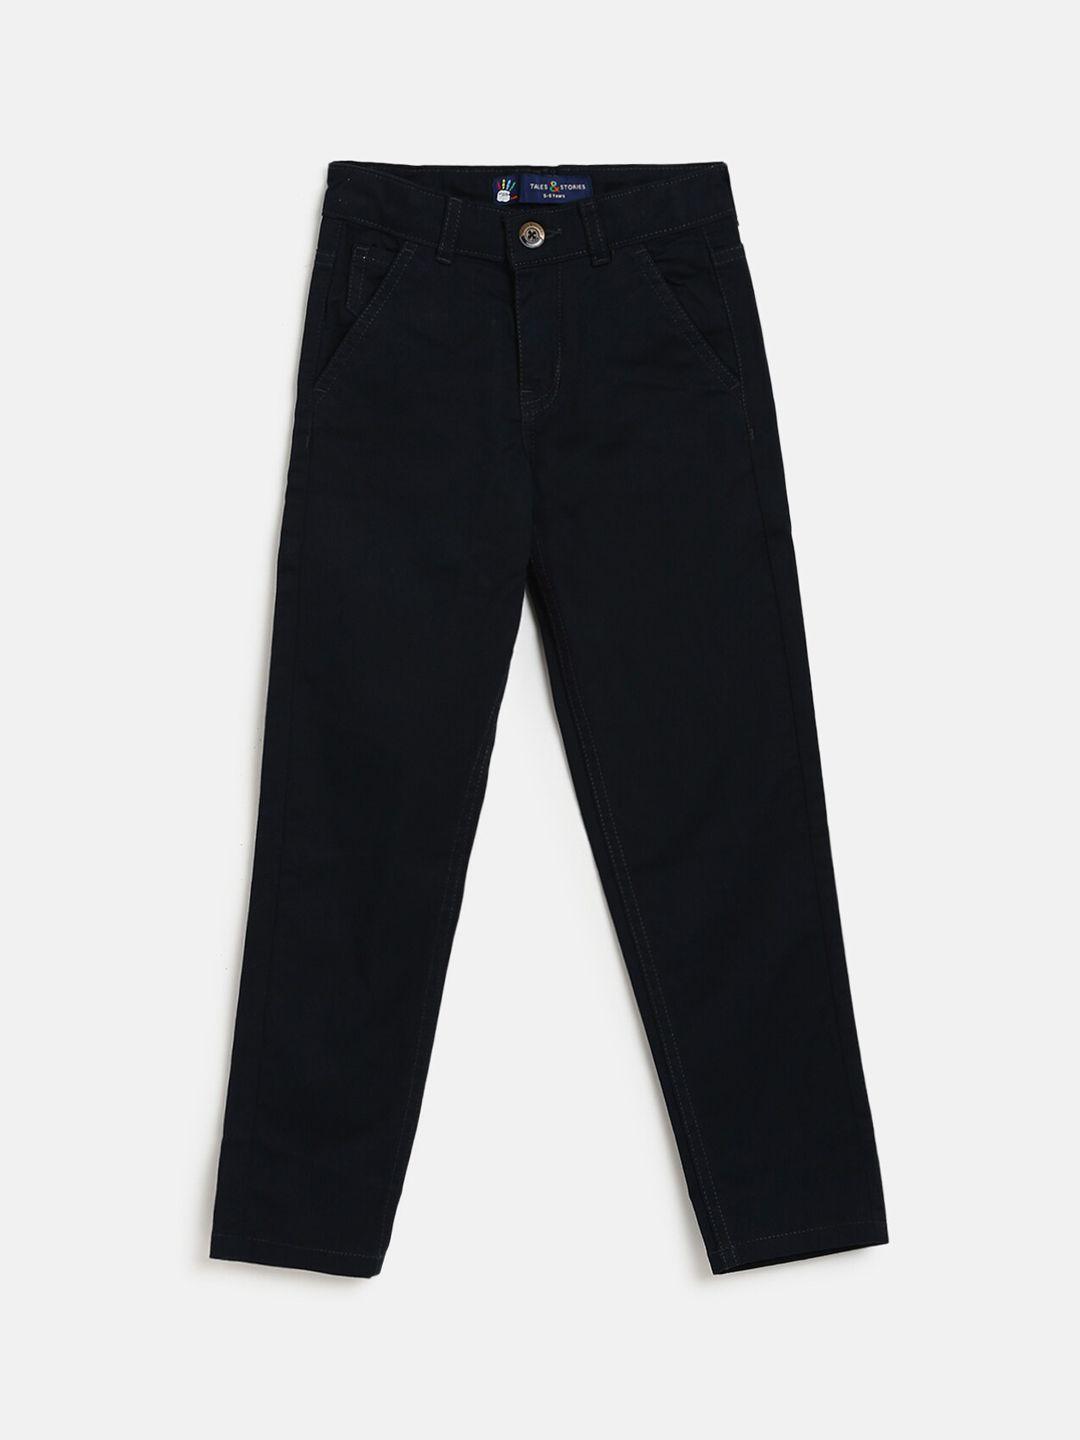 tales & stories boys navy blue slim fit chinos trouser